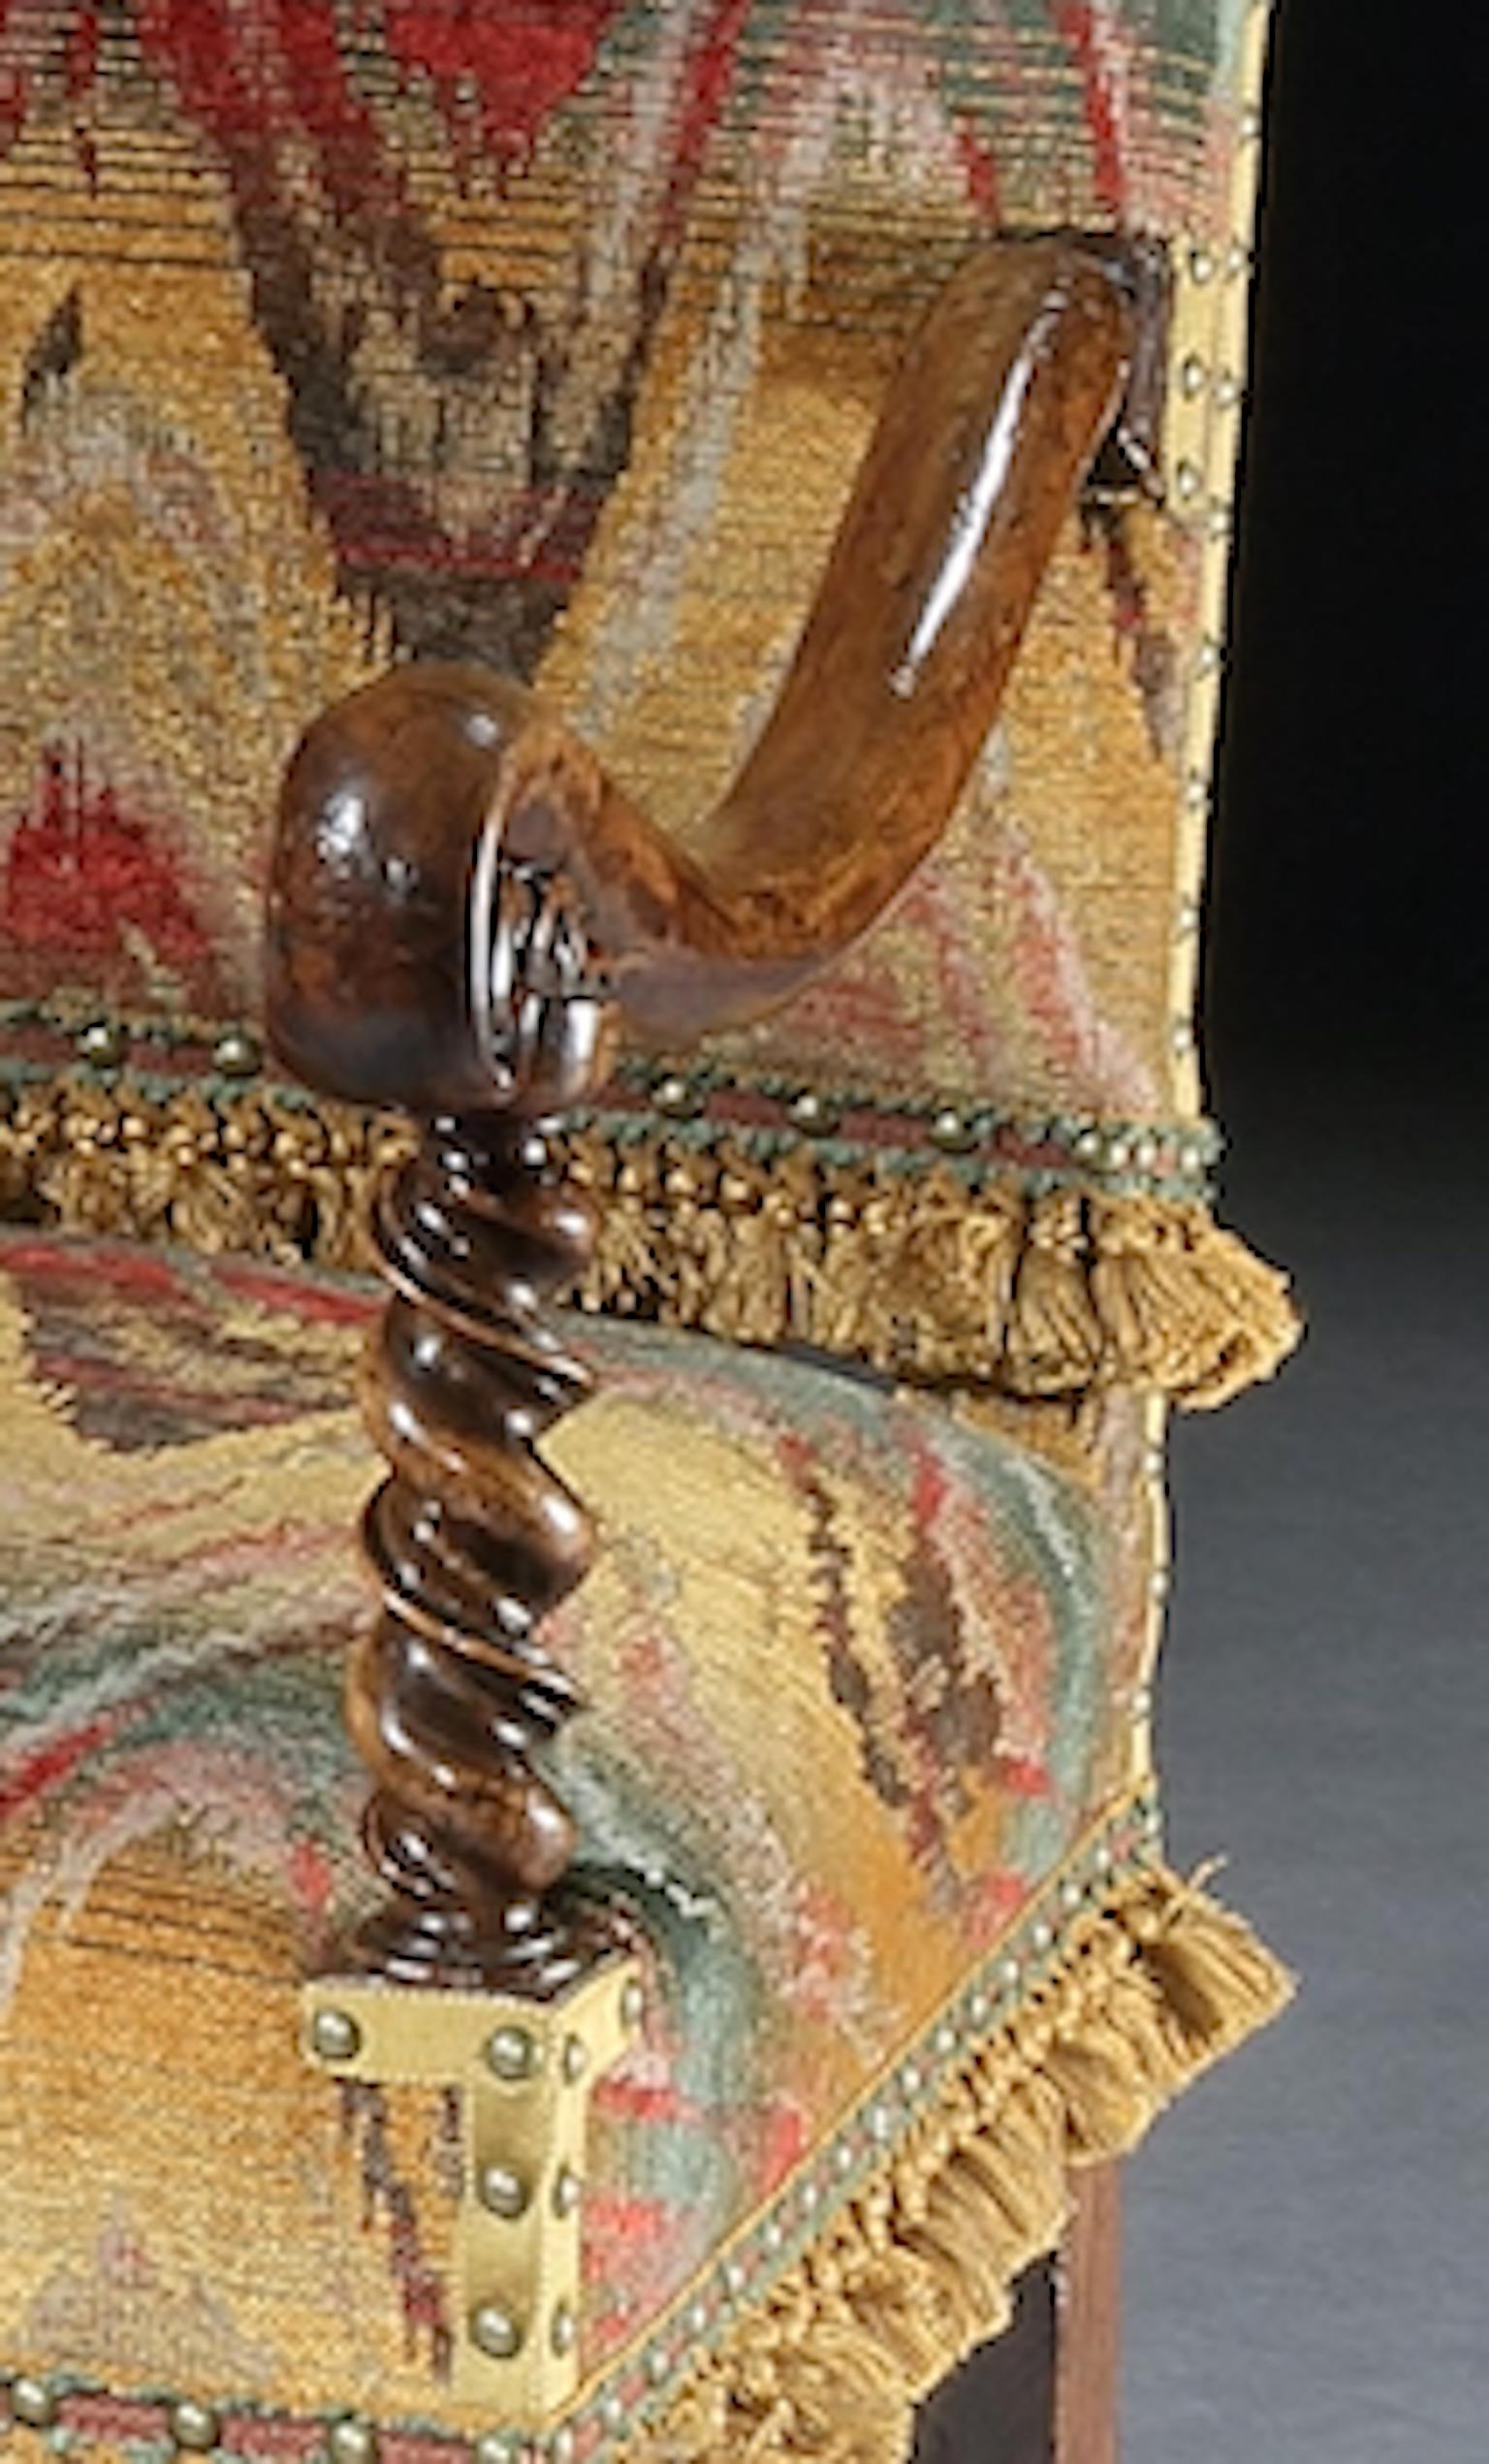 This open armchair is characteristic of the Haute Époque employing elegant barley-twist turnings and sweeping, curved, scroll arms. The bargello is a re-creation of a fashionable upholstery textile of the time and the passmenterie has been custom